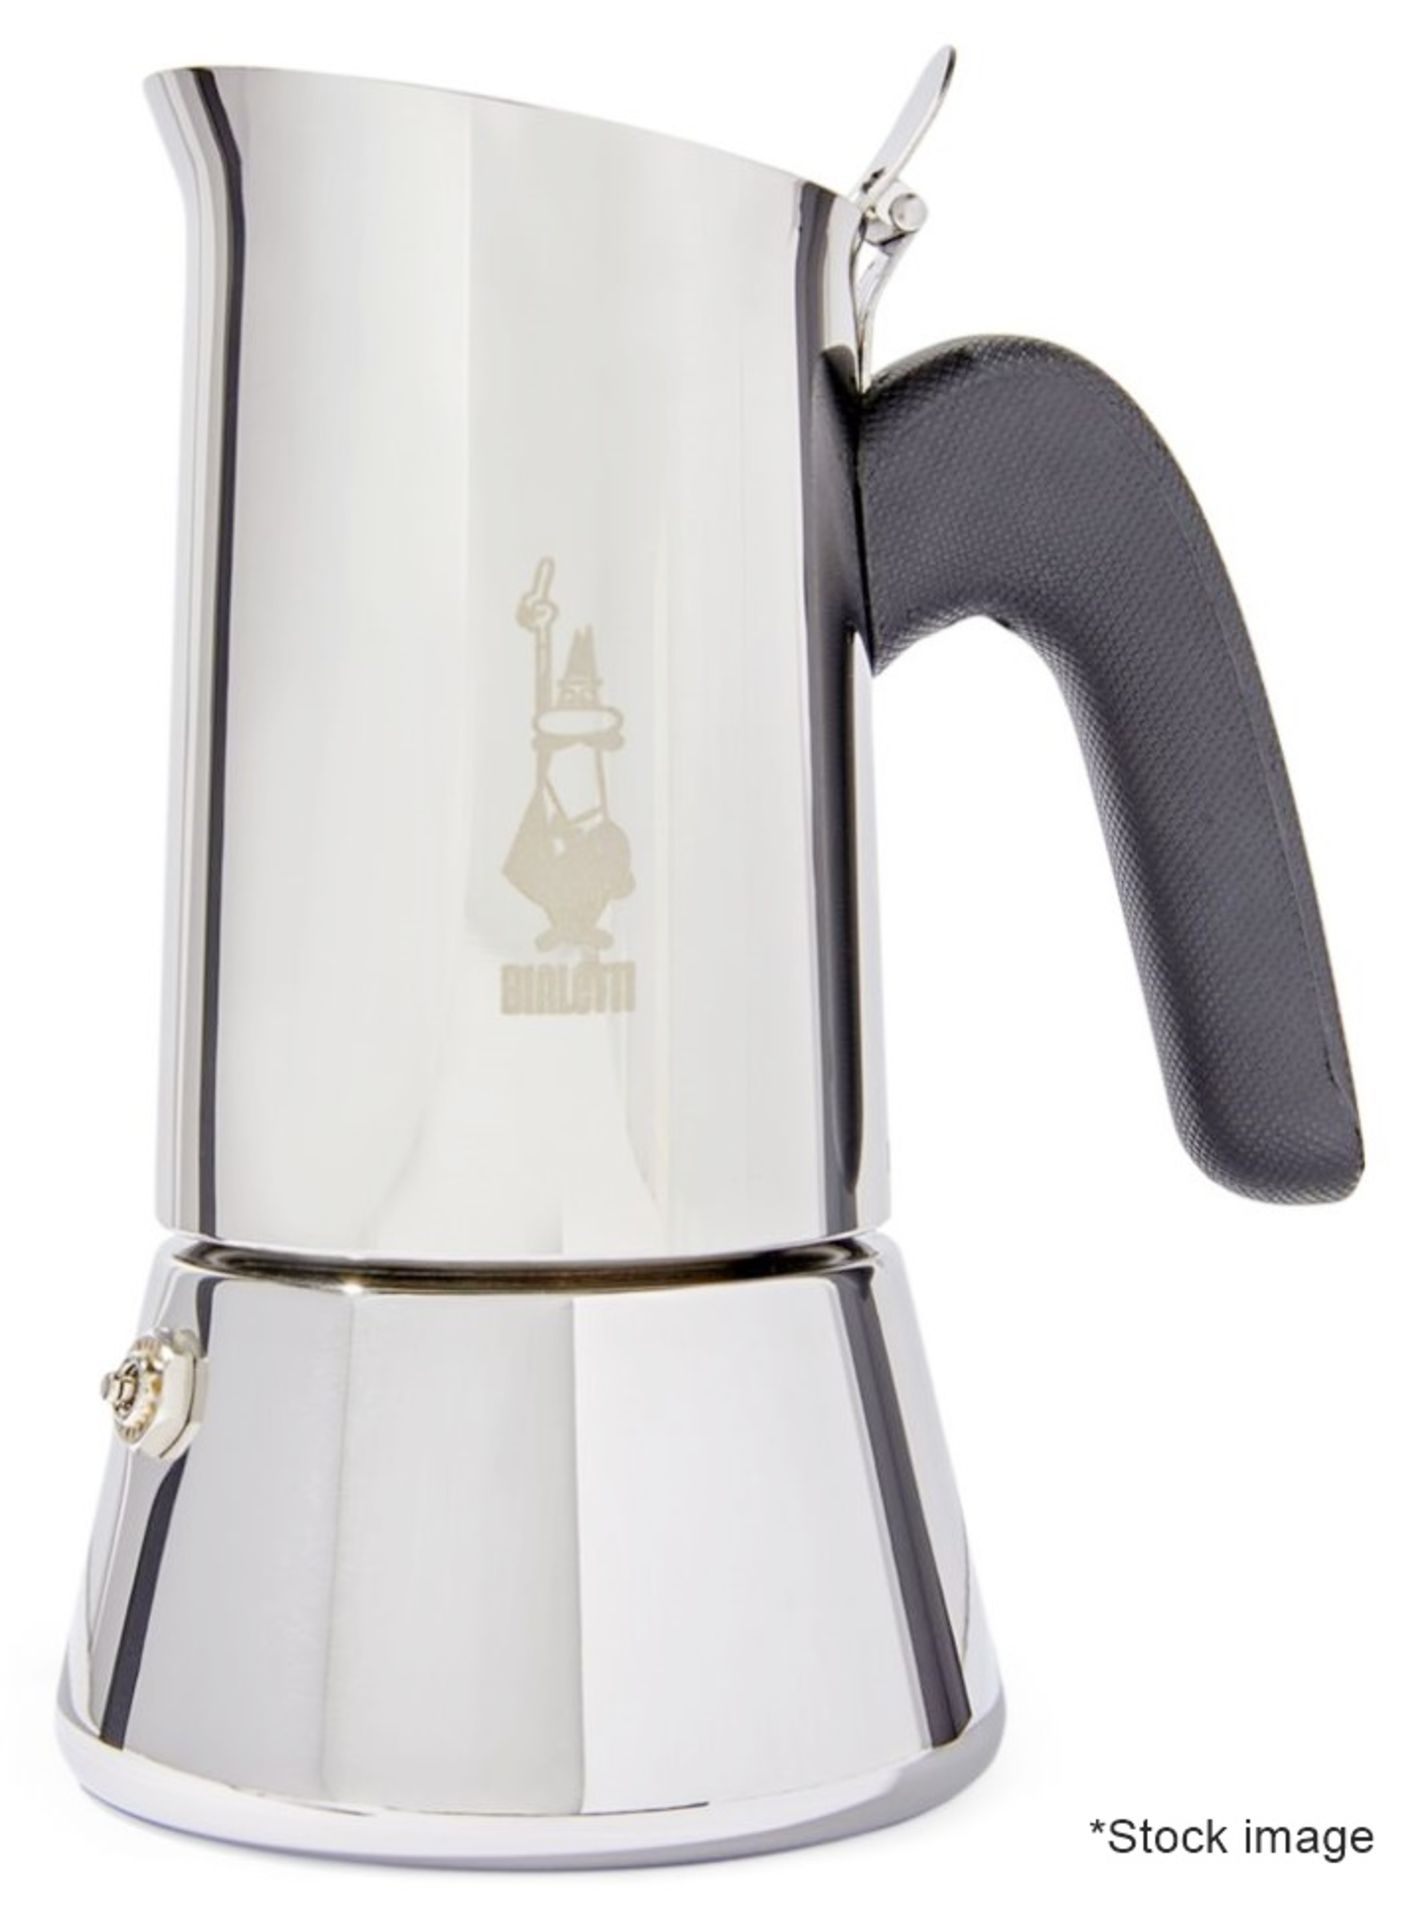 1 x BIALETTI 'Venus' Italian Induction 4-Cup Stainless Steel Cafetière - Original Price £45.95